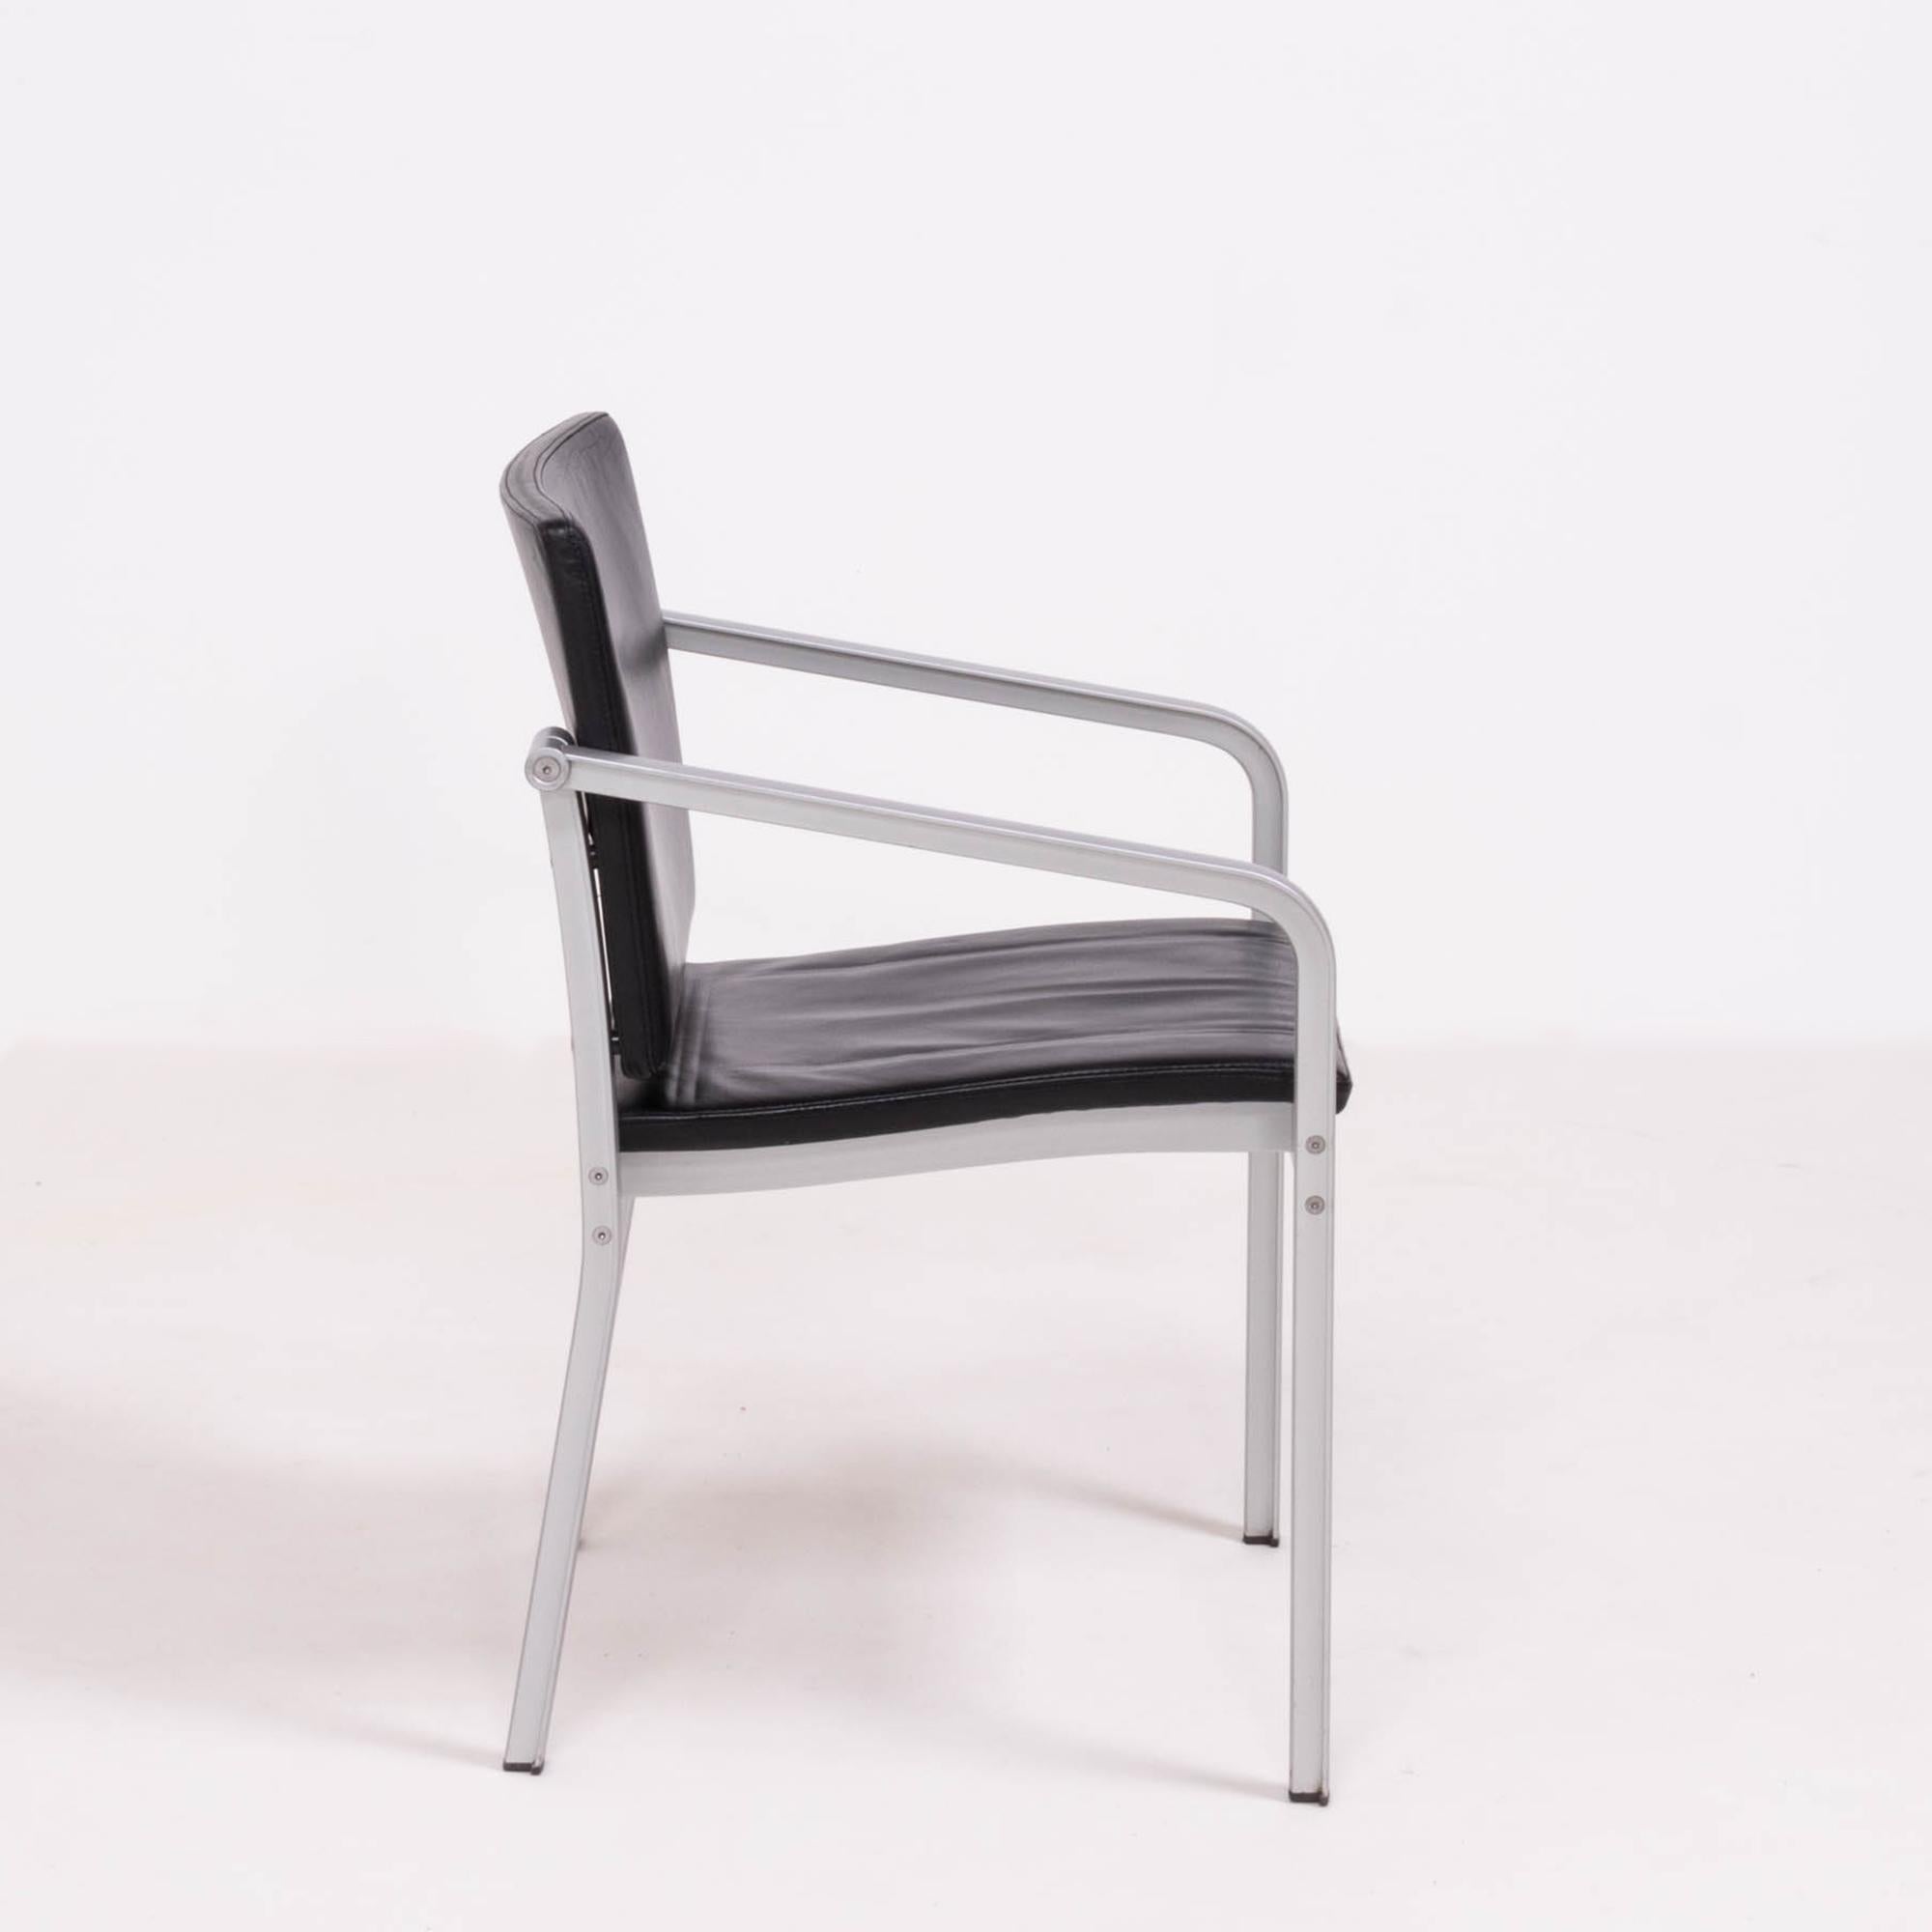 German Thonet by Norman Foster A901 PF Silver and Black Leather Dining Chairs